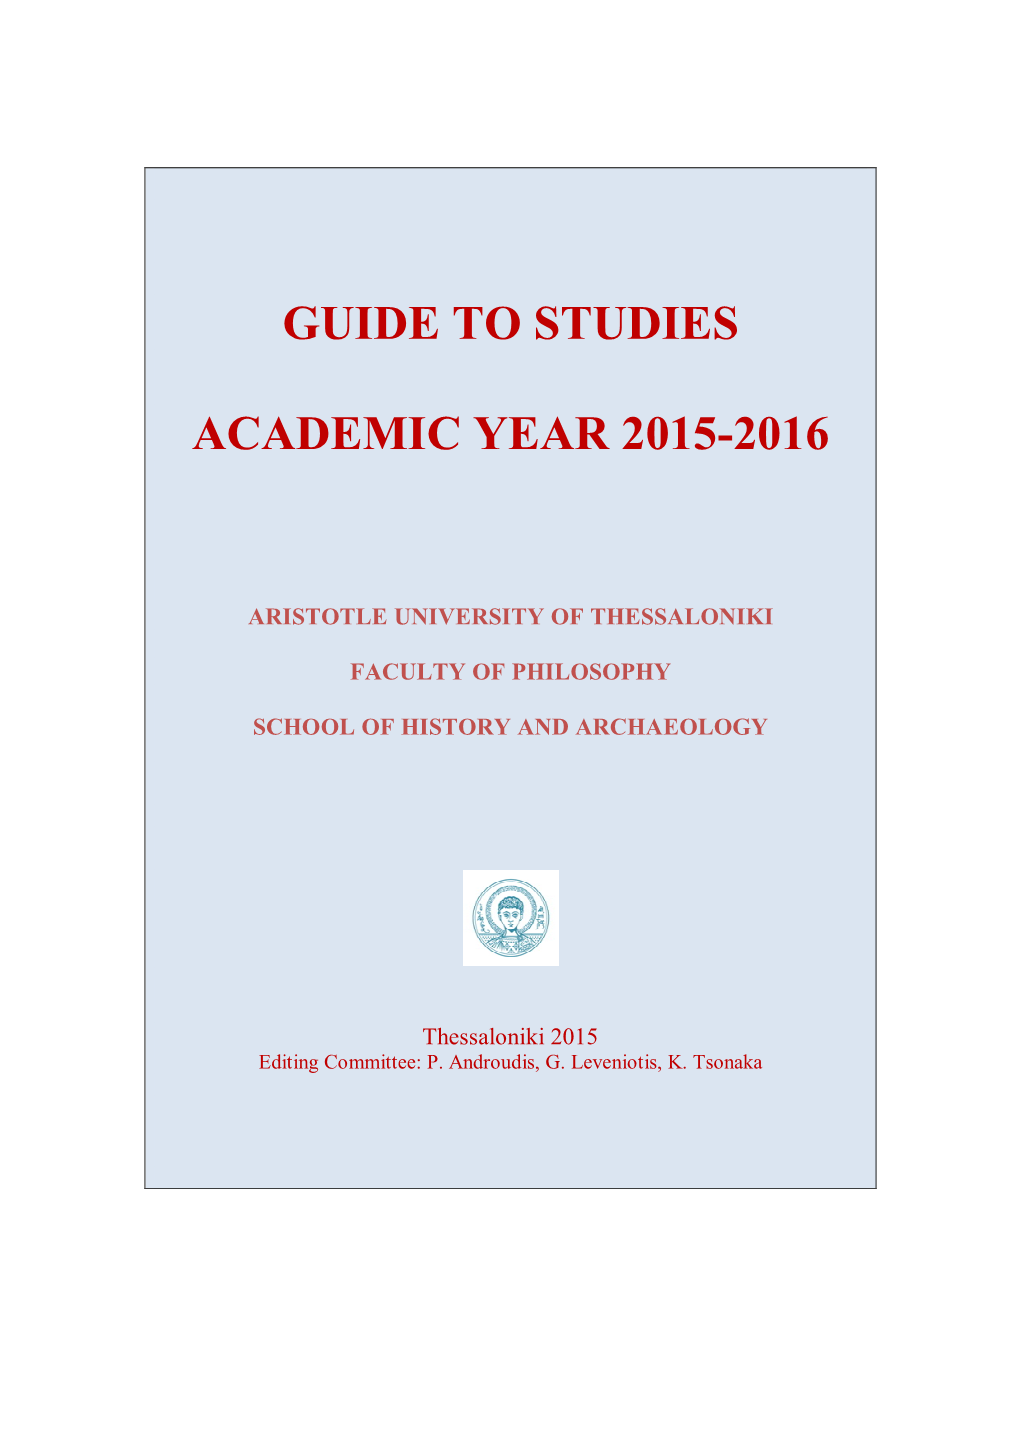 Guide to Studies Academic Year 2015-2016